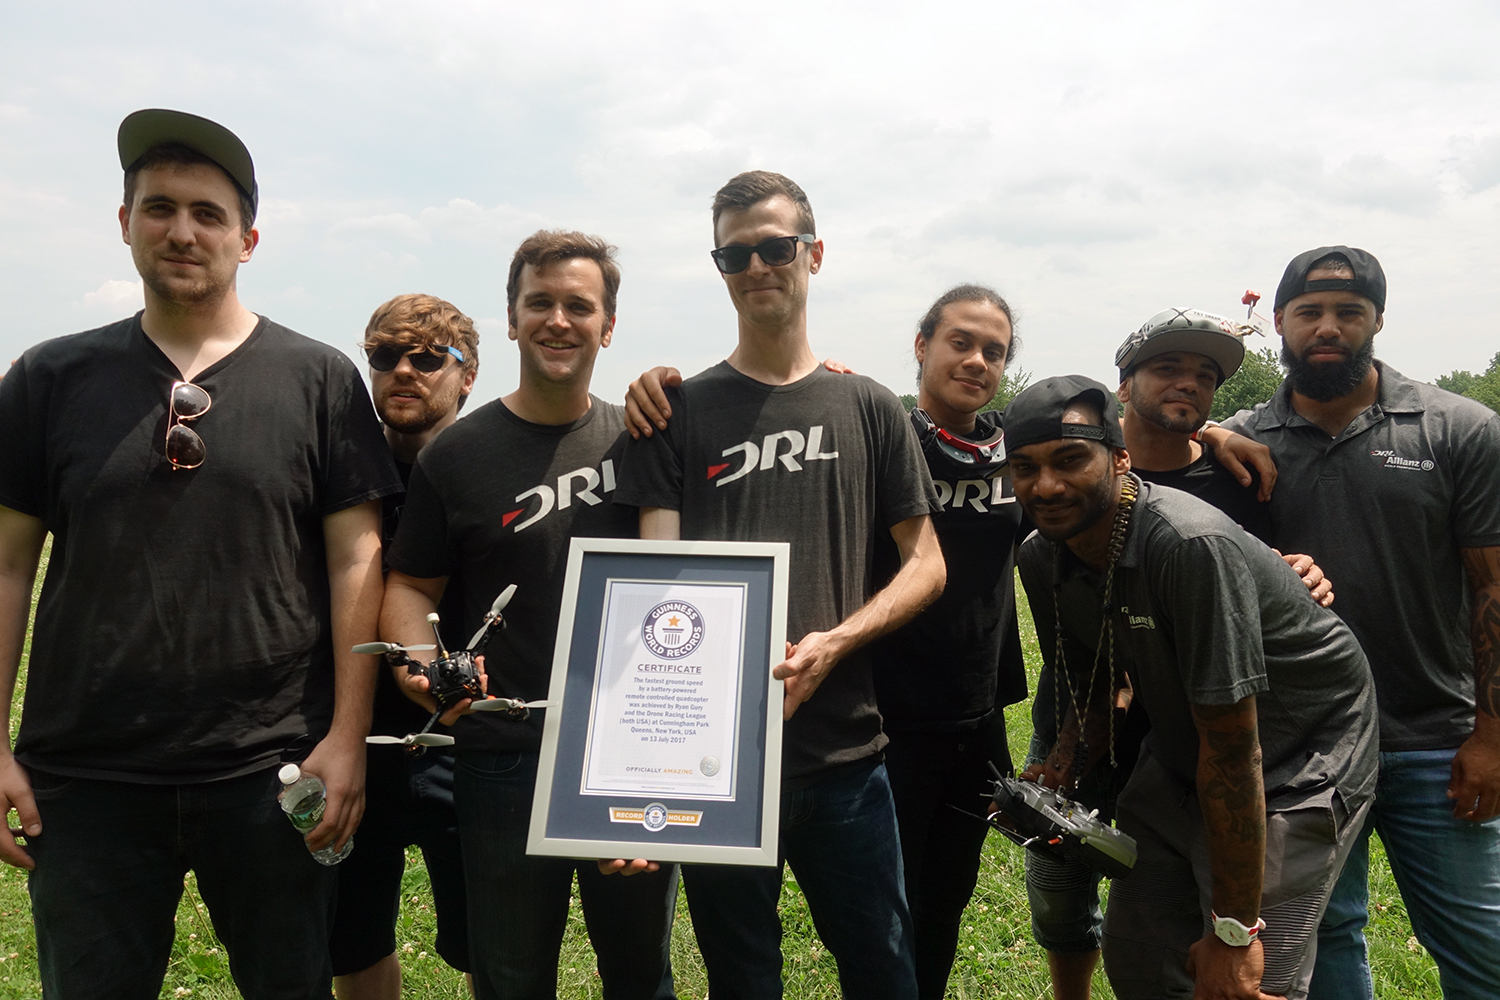 racerx worlds fastest drone racing certificate